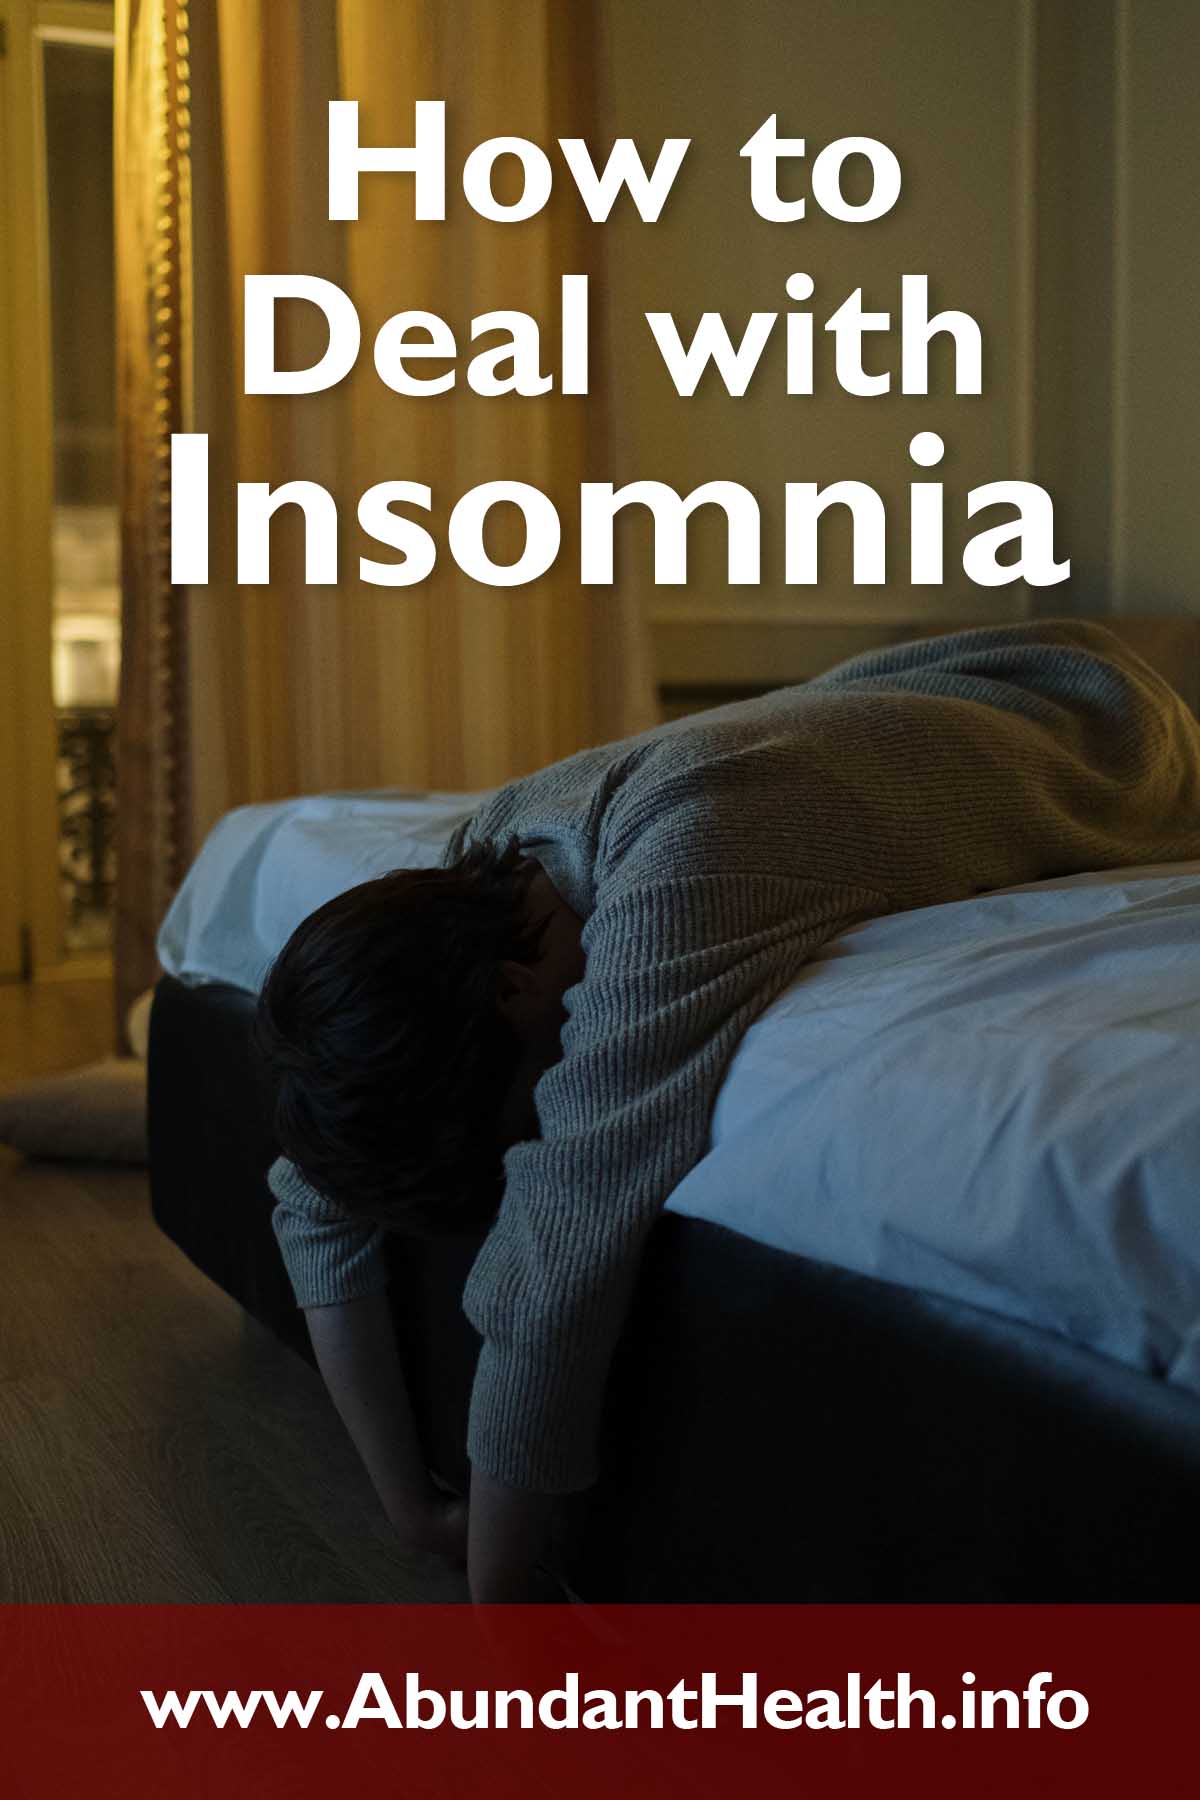 How to Deal with Insomnia